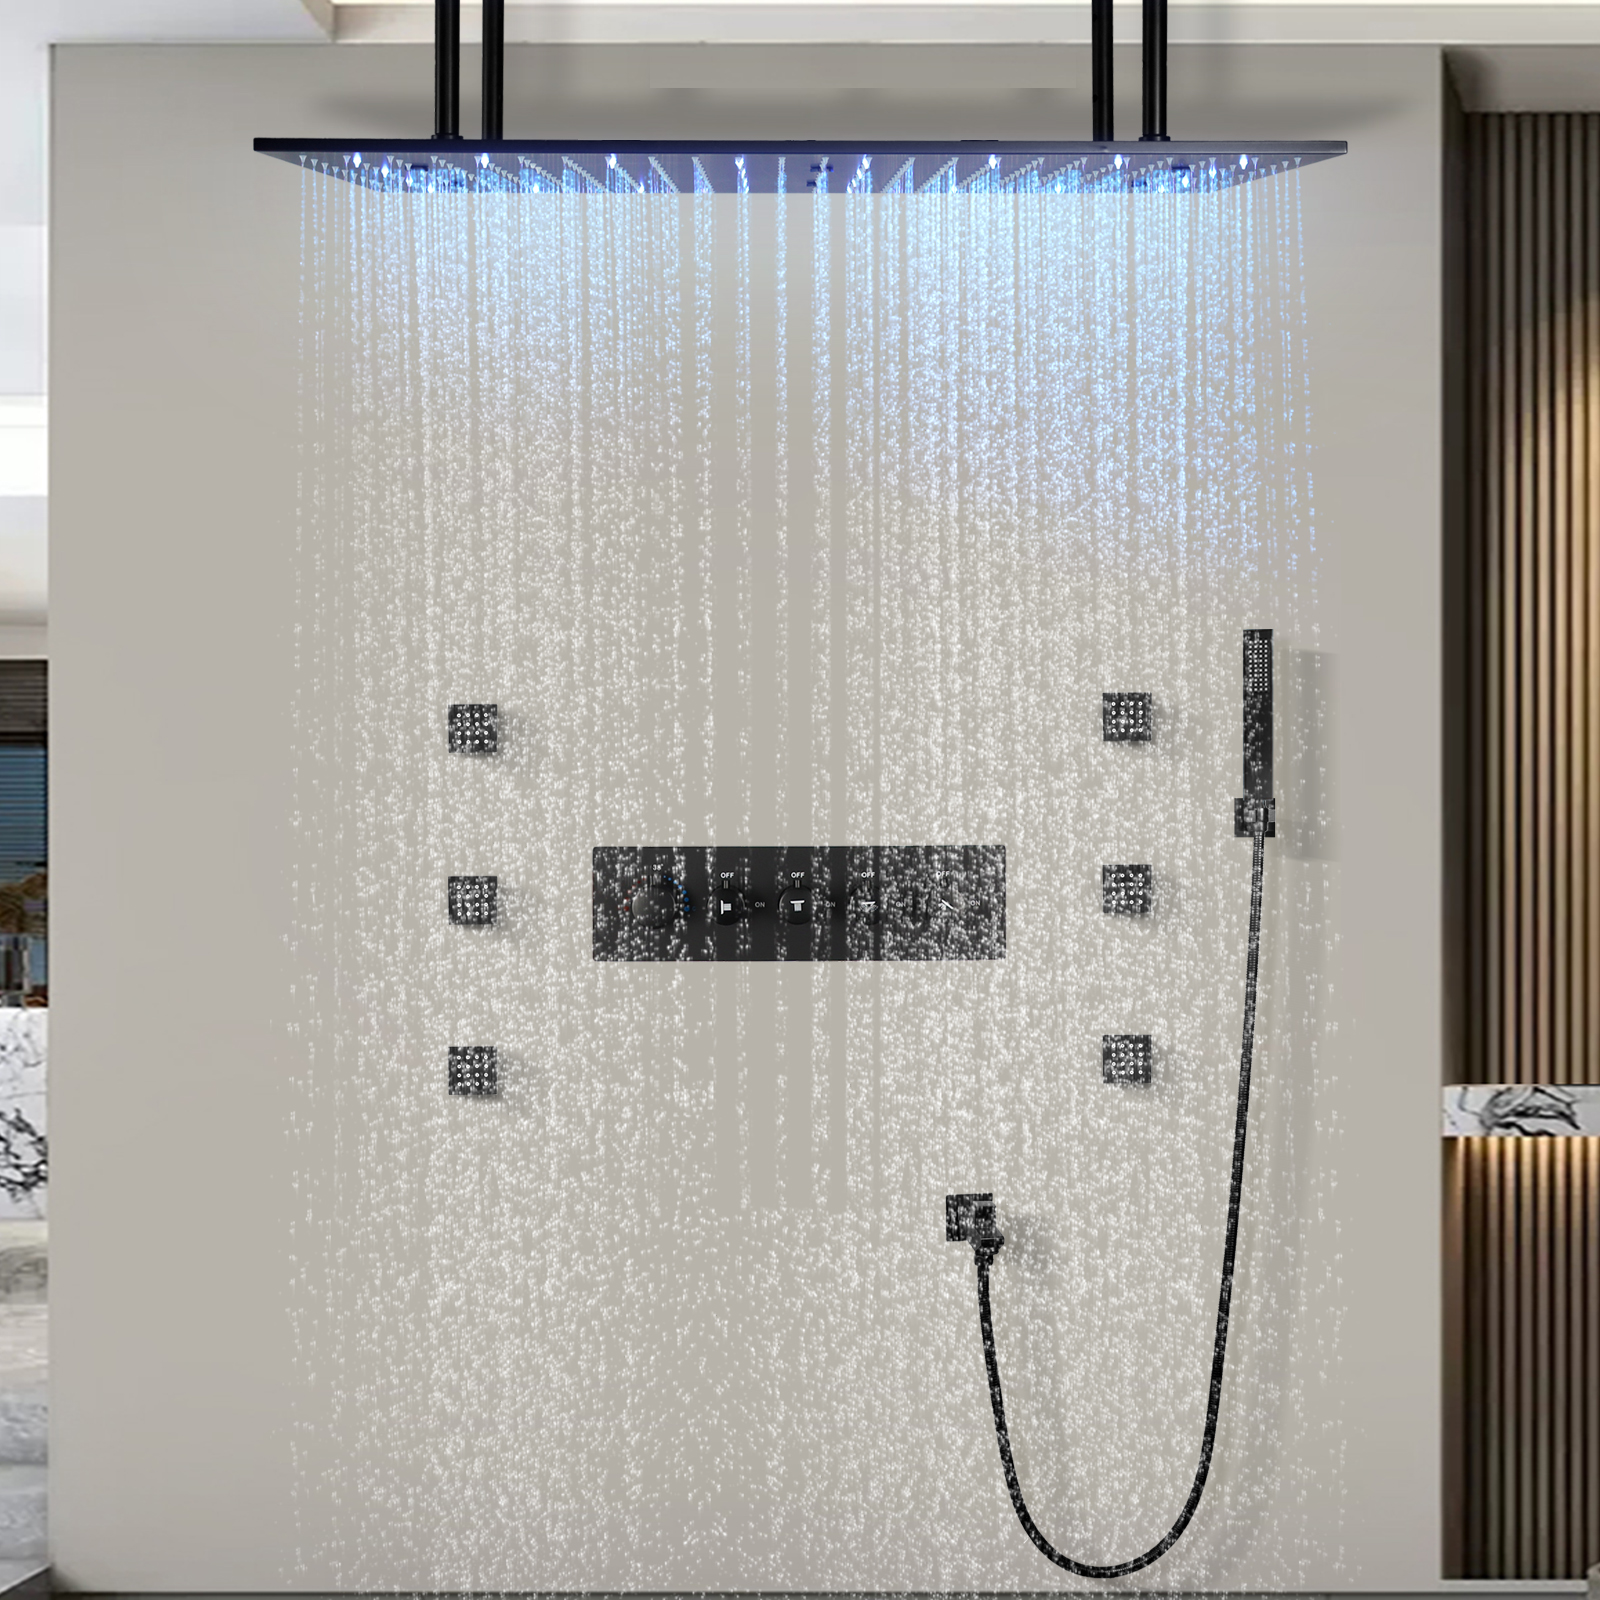 Exploring The Elegance And Functionality of Black Rain Shower Systems